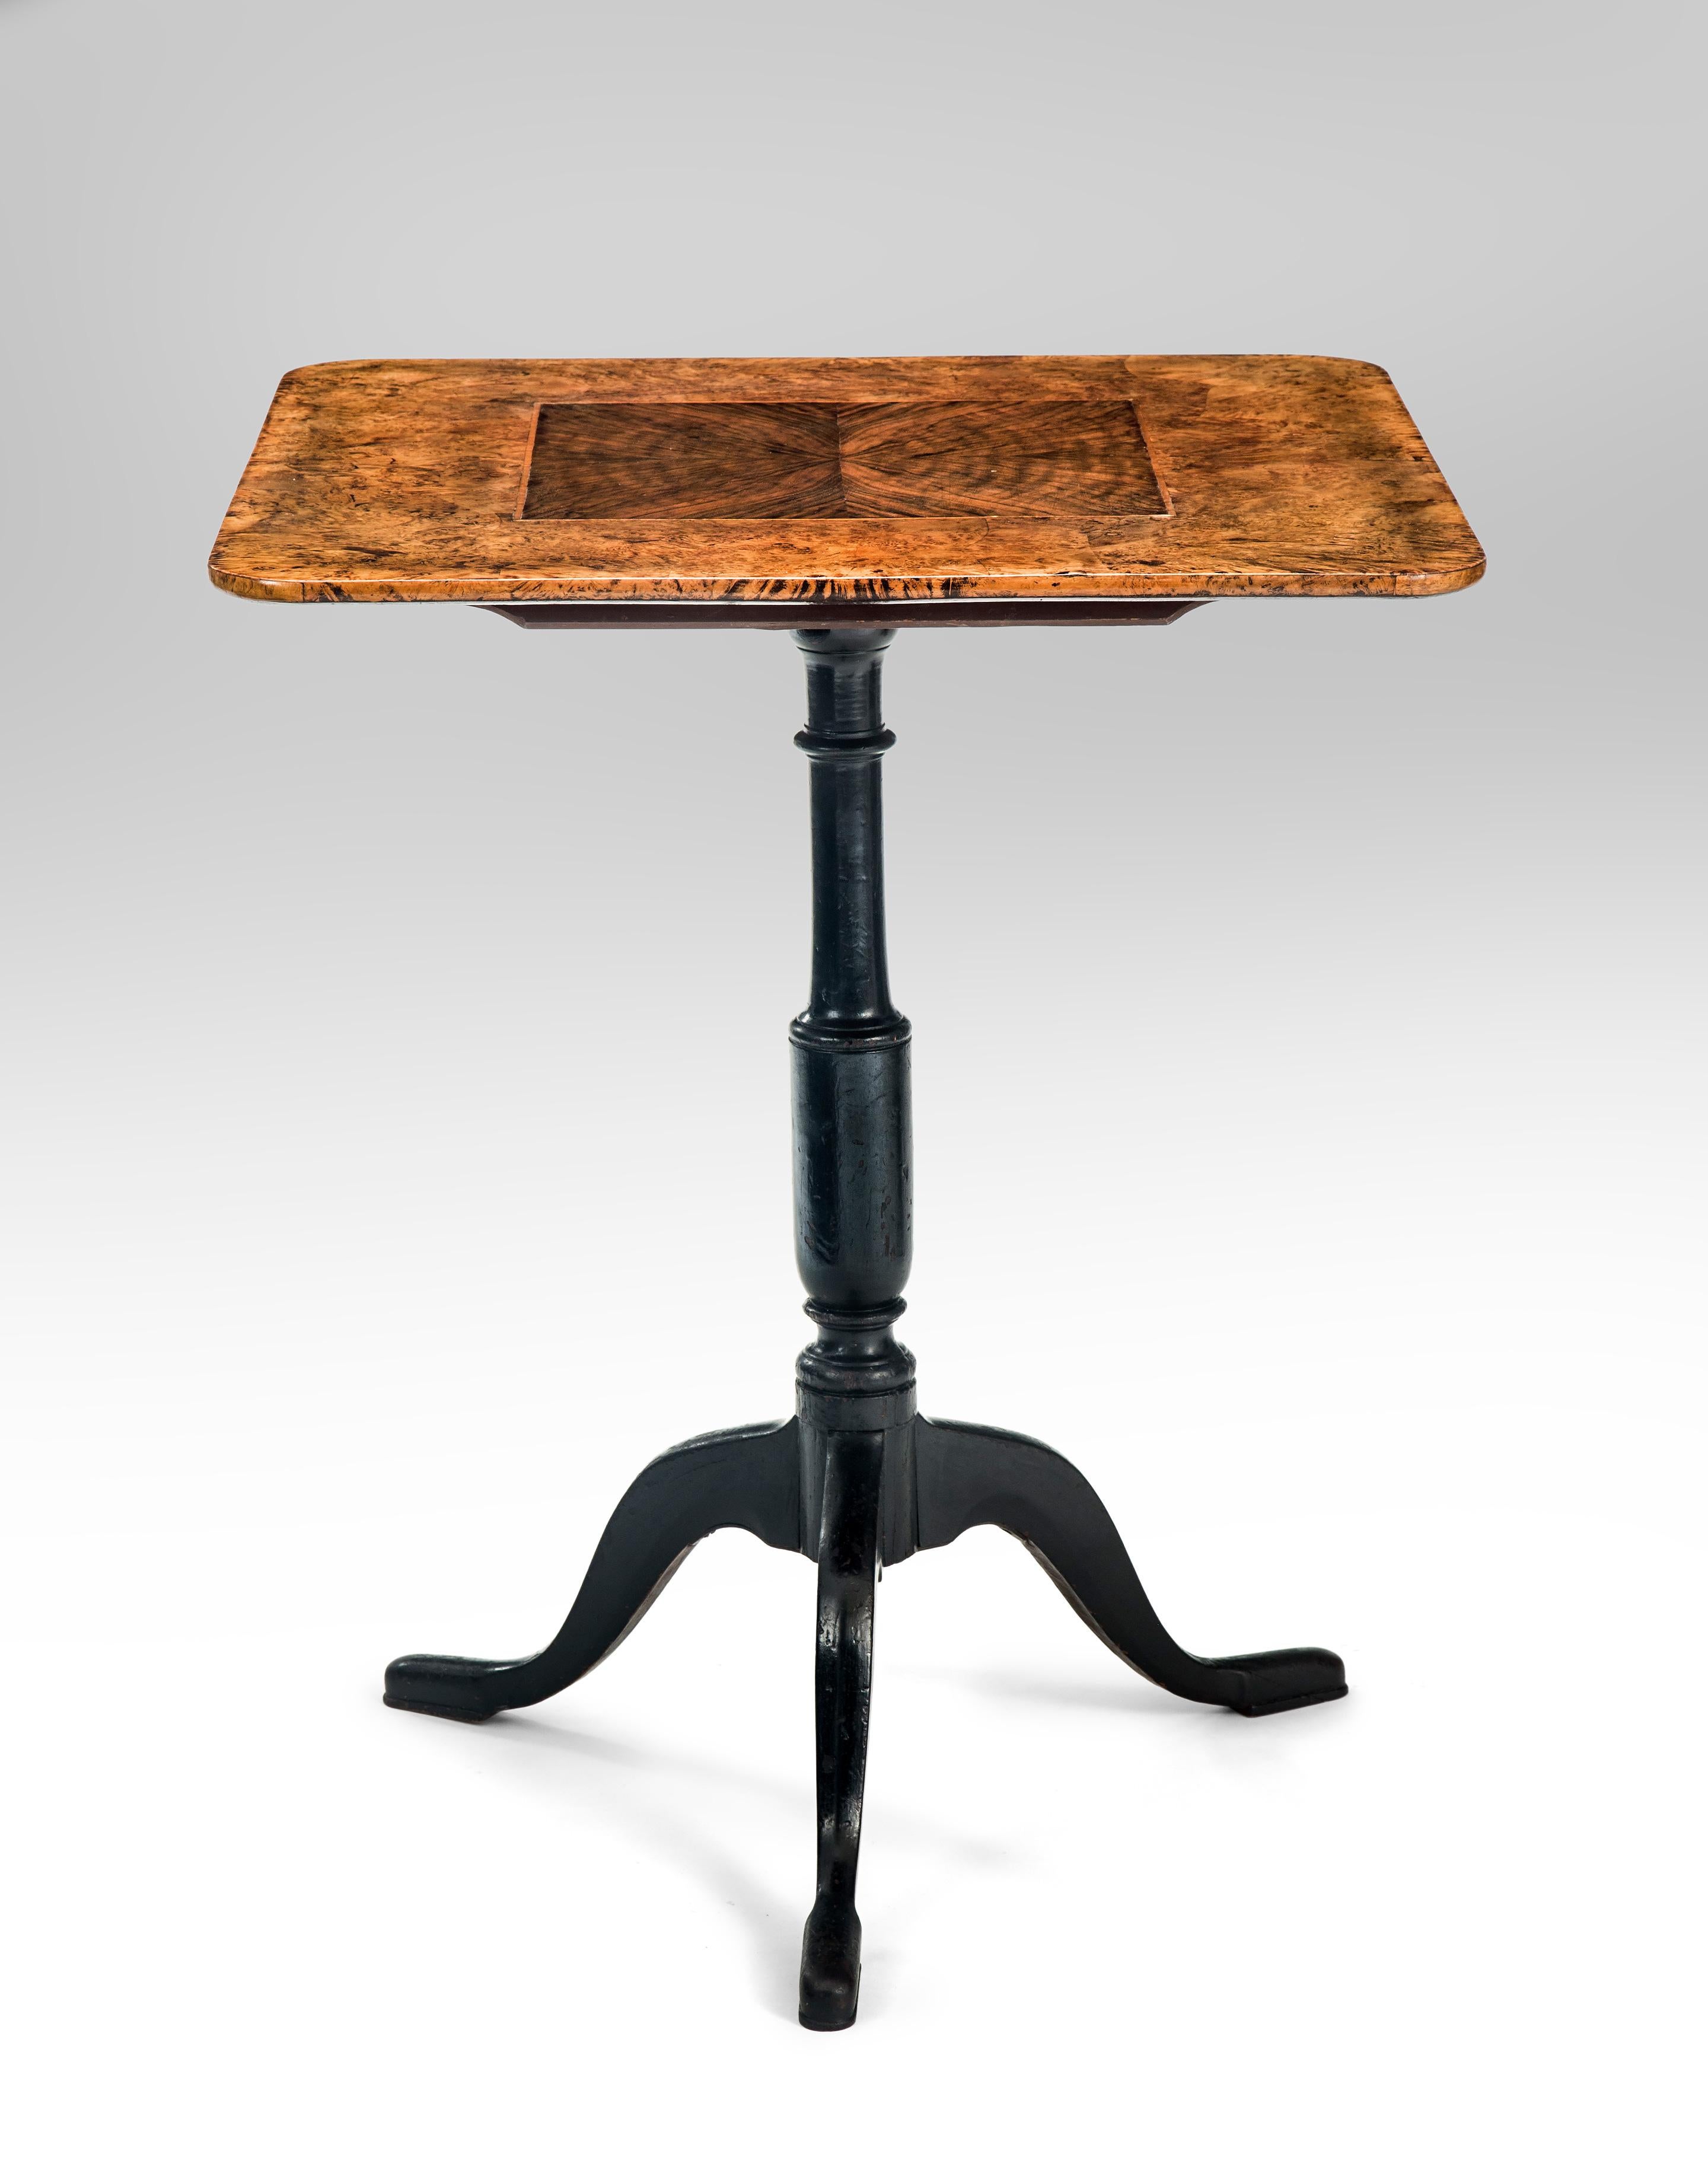 A Swedish burl wood and Walnut Tilt-Top Table 
Late 18th century
A lovely table both elegant and understated with a richly veneered top. Its straightforward design is perfect for a contemporary or Classic interior.
The square burl wood top with a